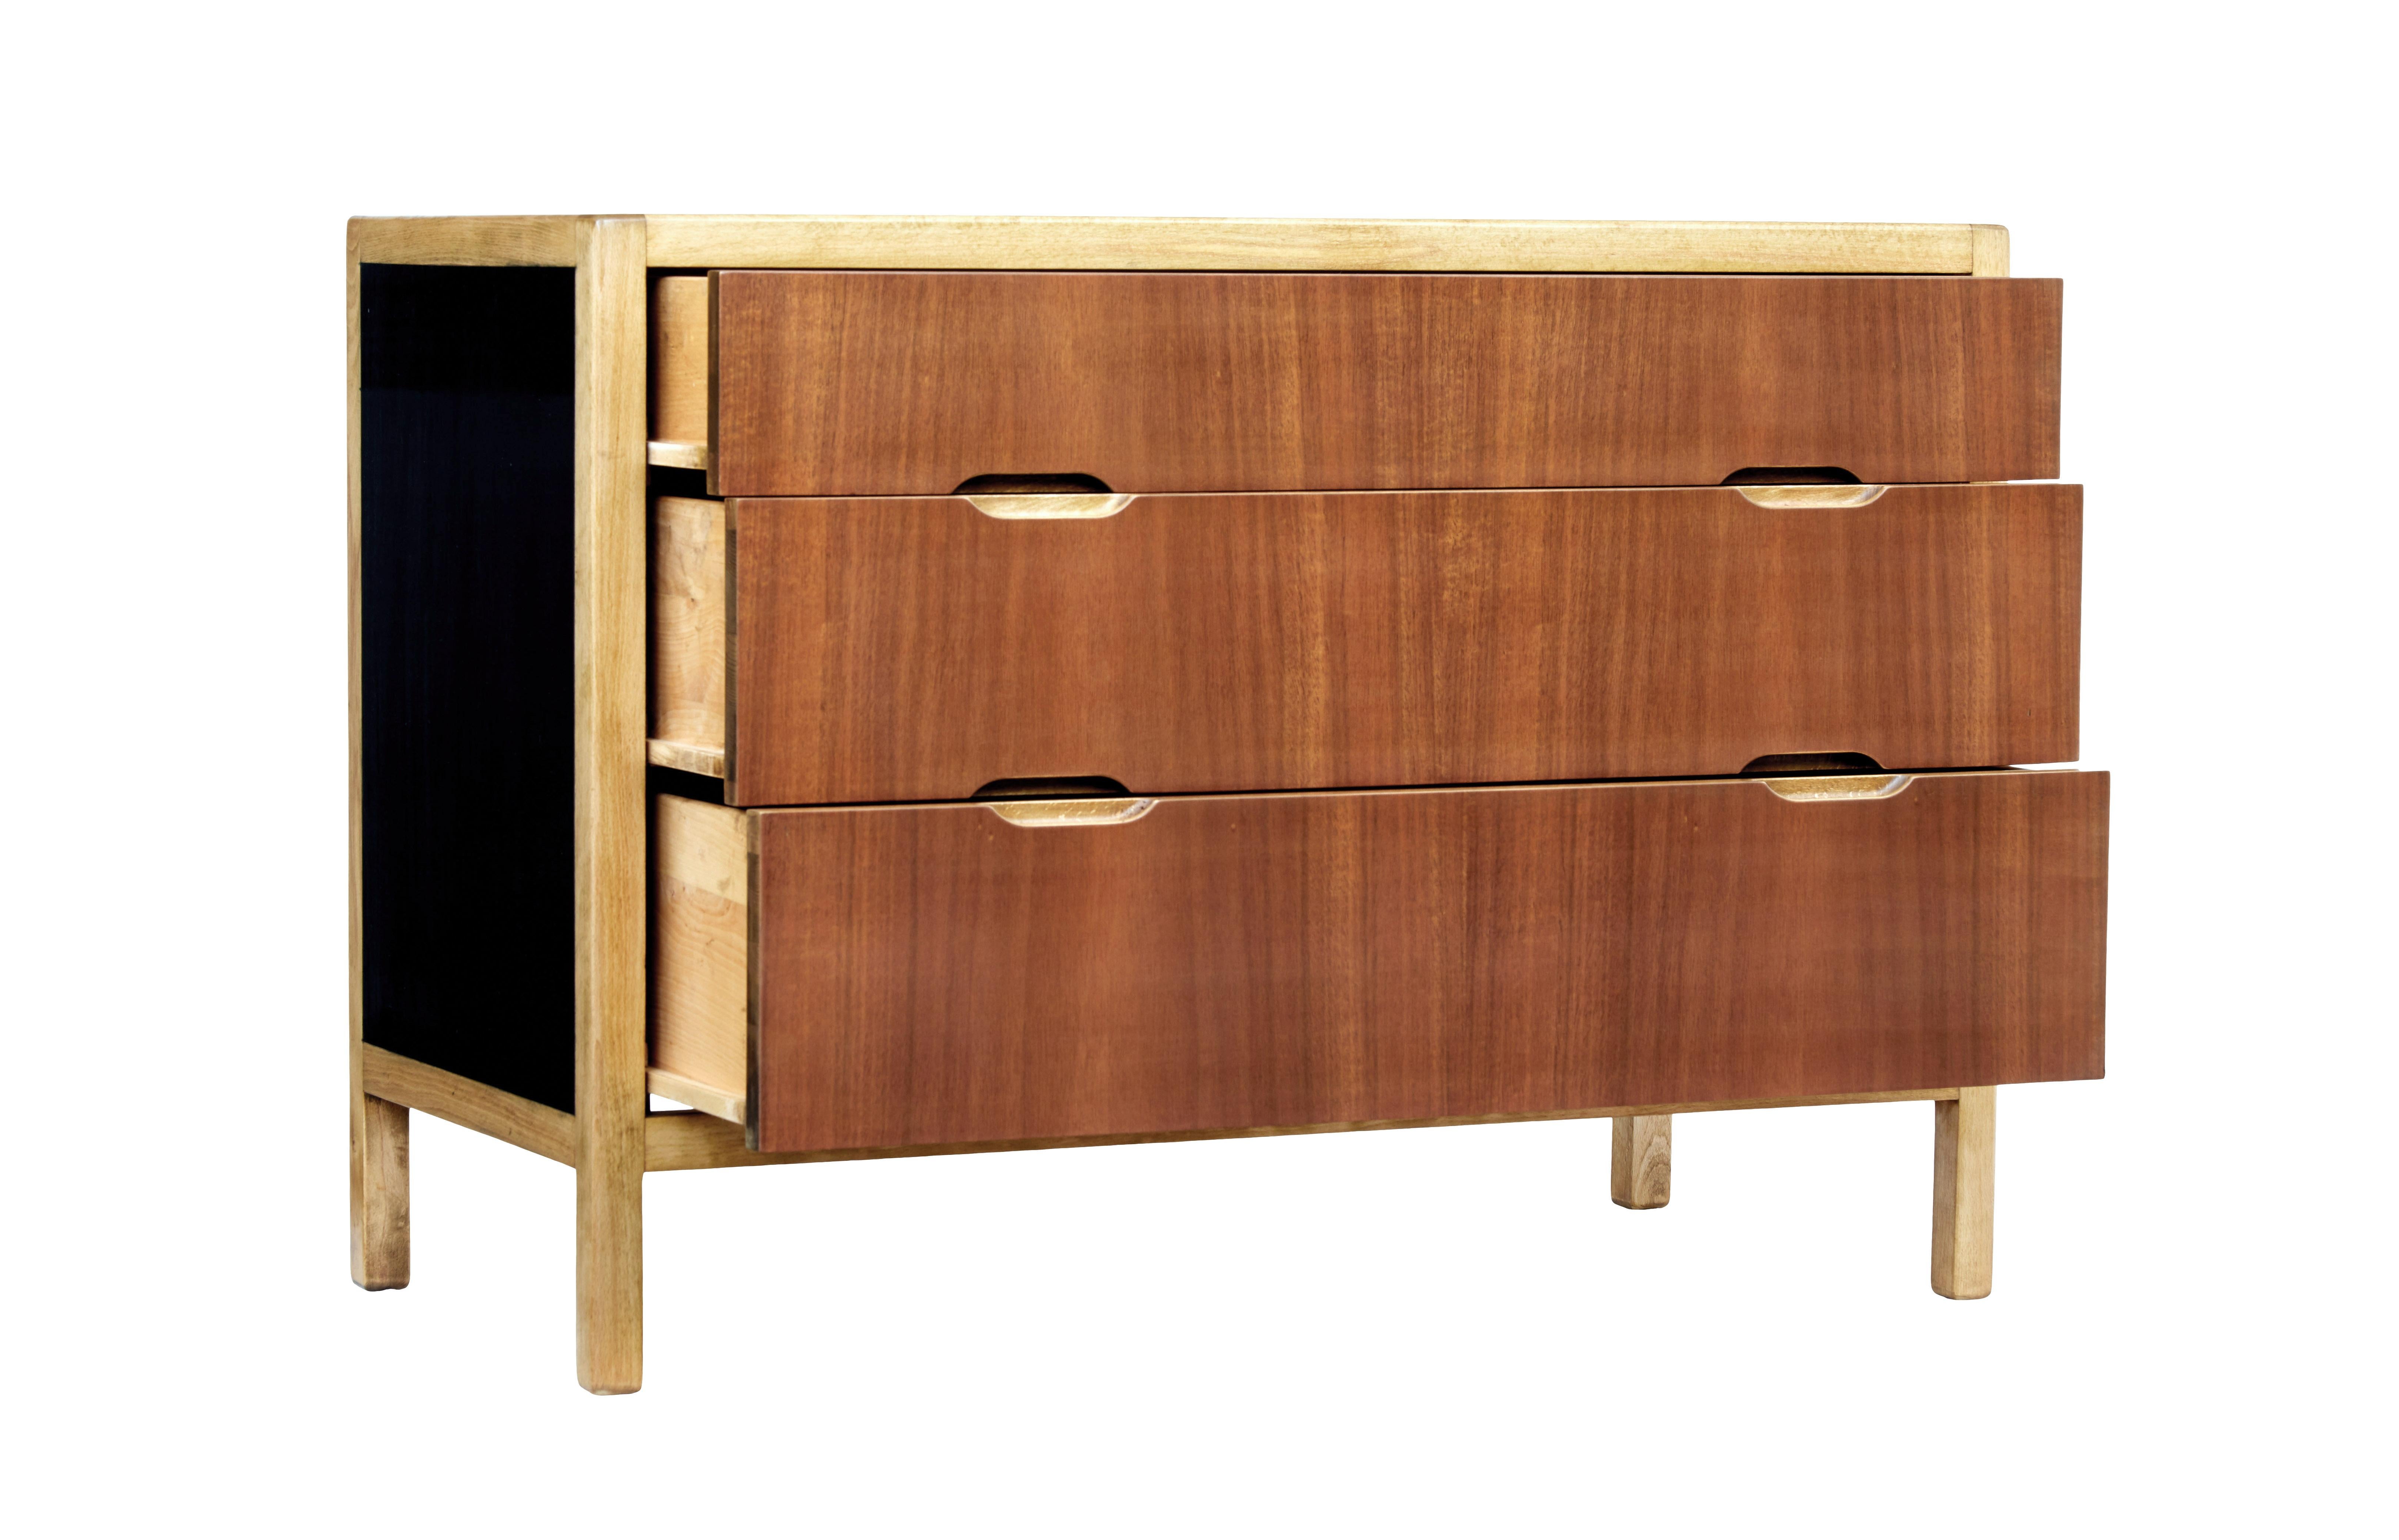 Good quality swedish chest of drawers by forenades mobler of linkoping, circa 1960.

Outer birch frame with ebonised side and top panels, complete with contrasting teak drawer fronts with inset handles.

Stamped on the reverse forenades mobler